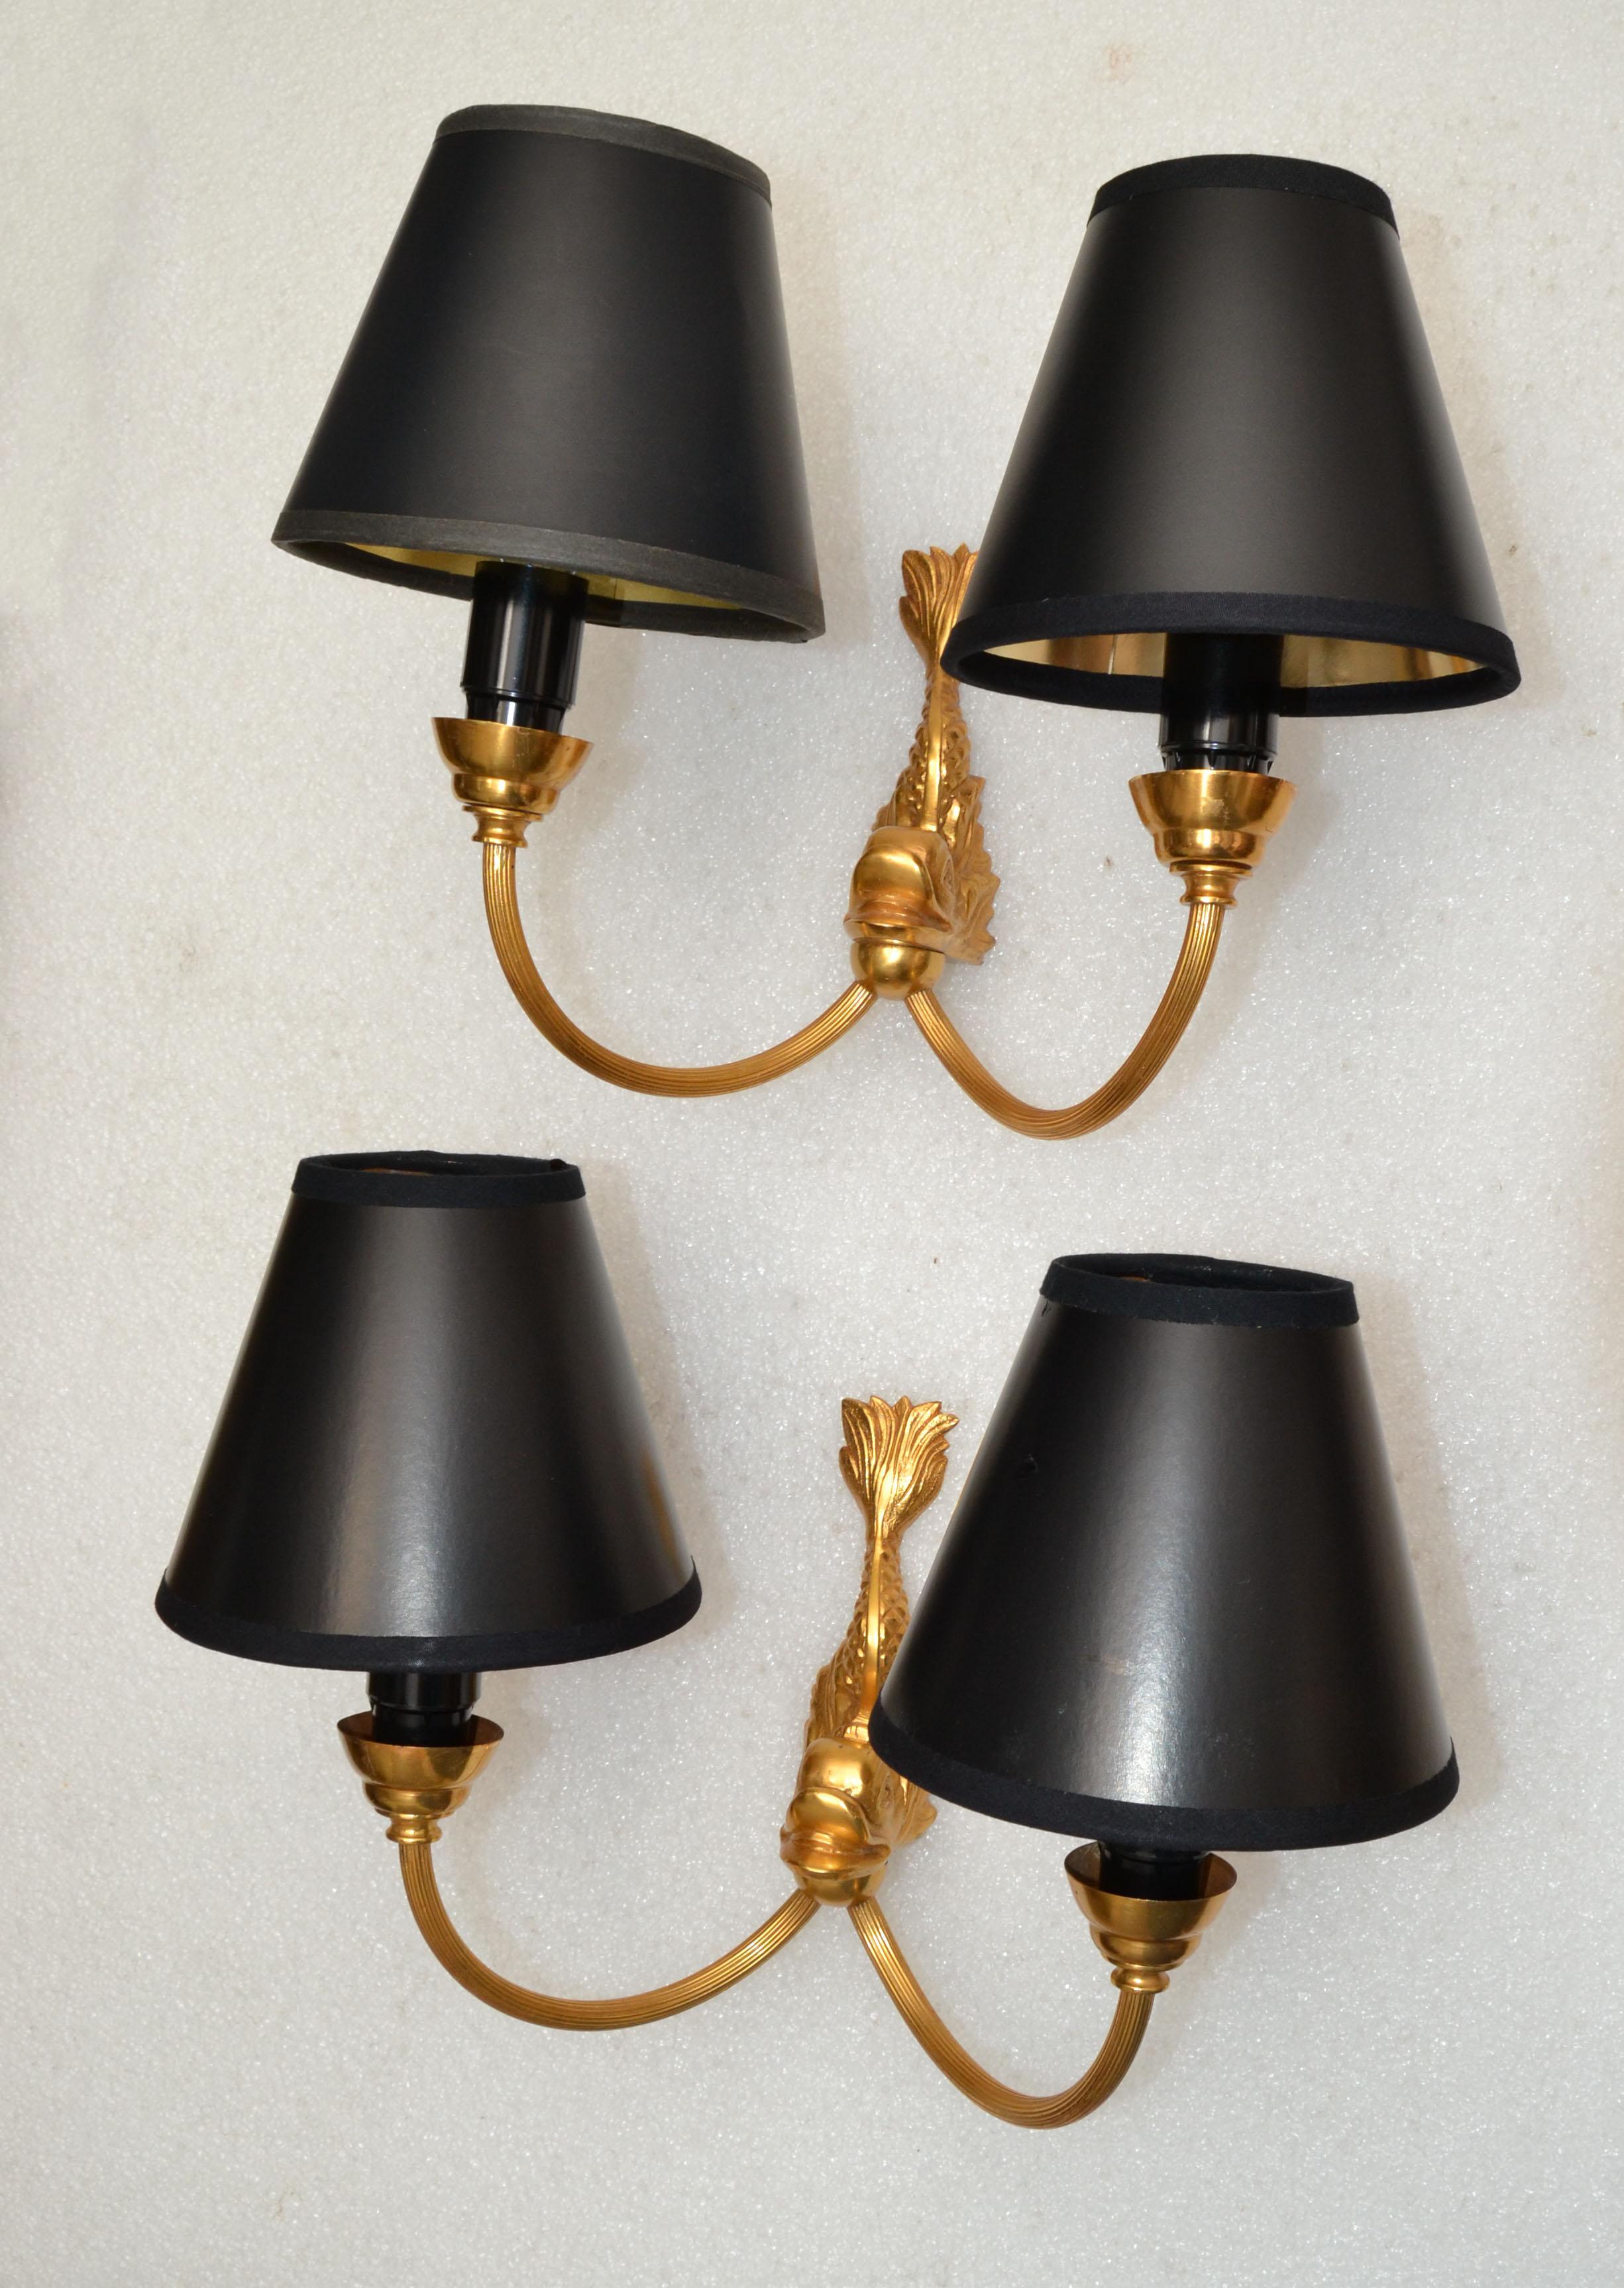 French Maison Lancel 2 Light Brass Dolphin Sconces Black Shade, France, 1950, Pair For Sale